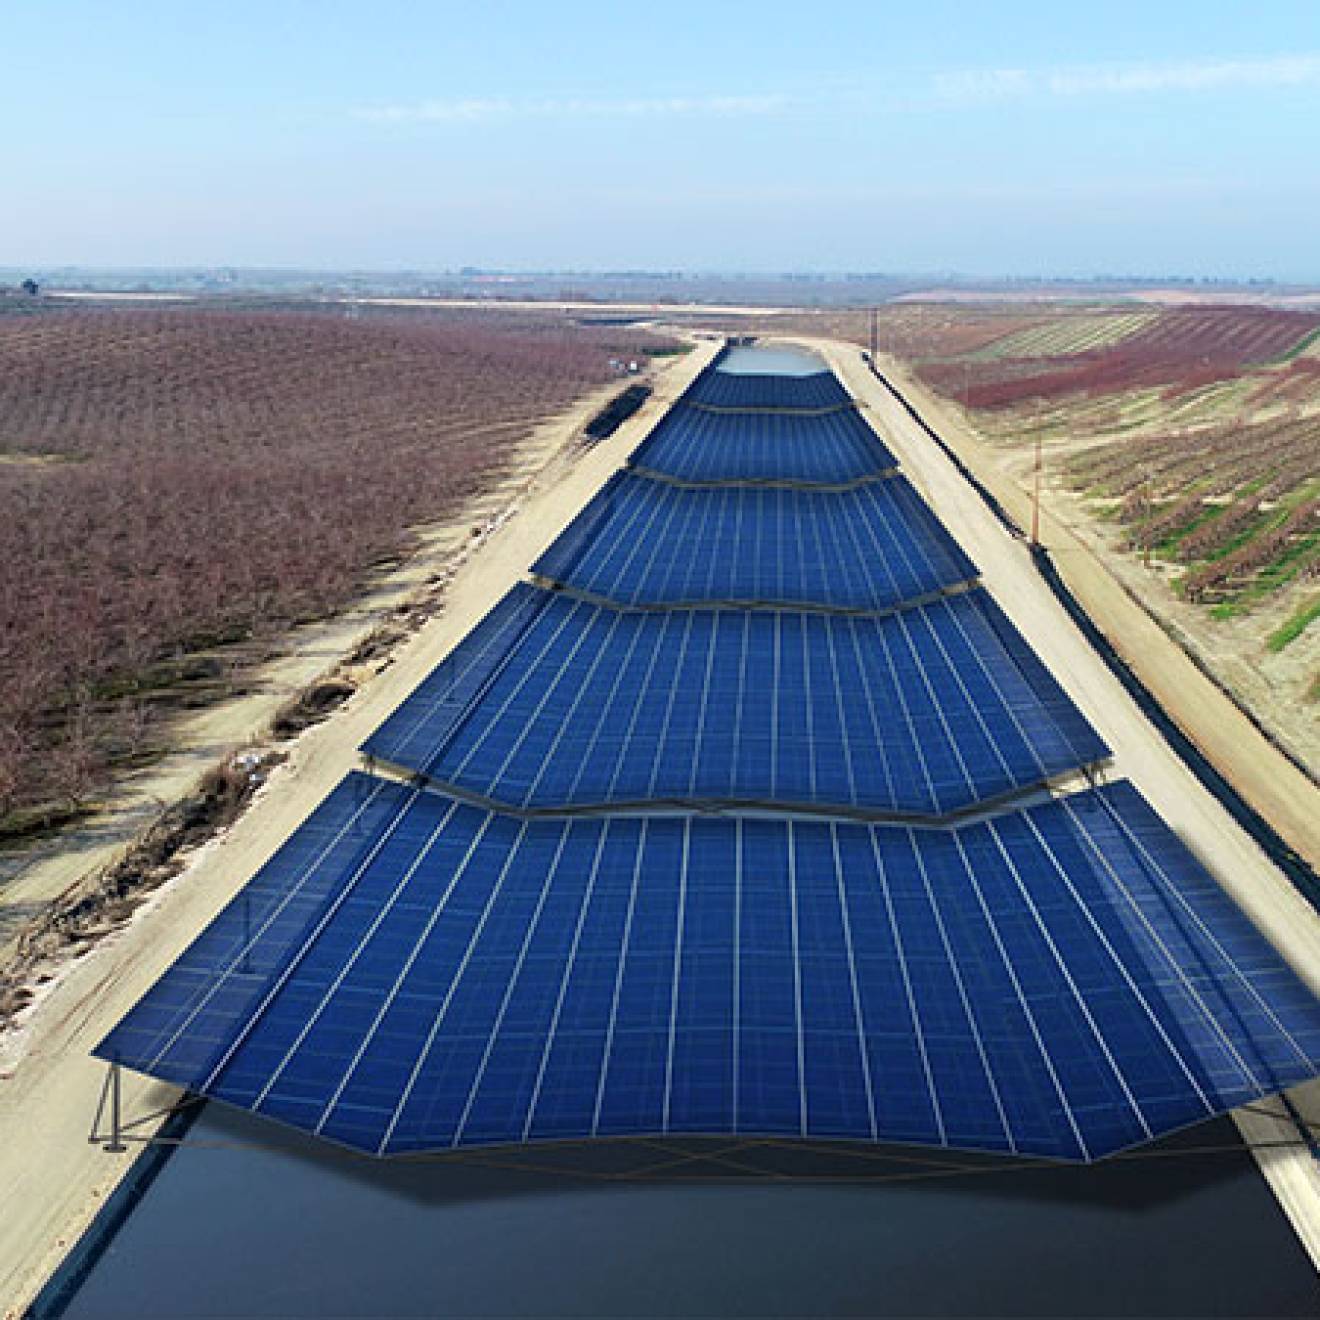 Canal covered with solar panels